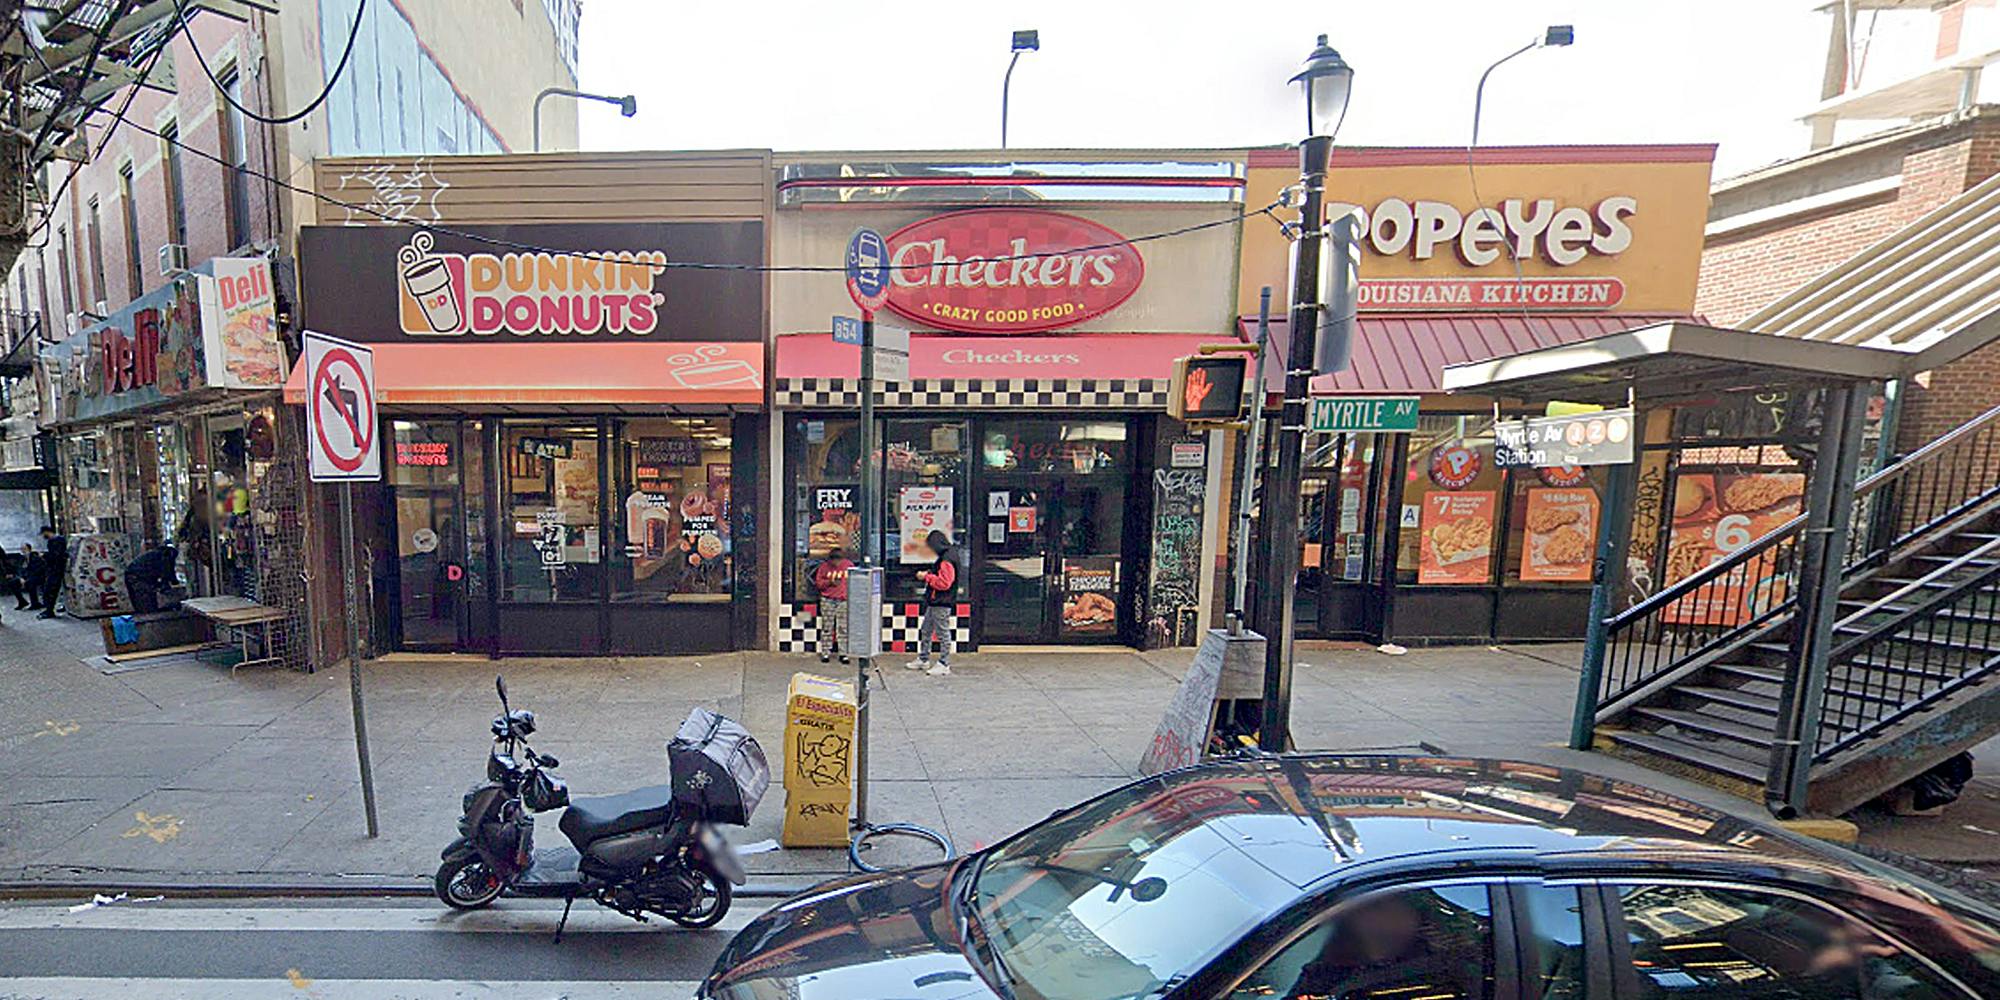 broadway myrtle station, Dunkin Donuts, Checkers, and Popeyes